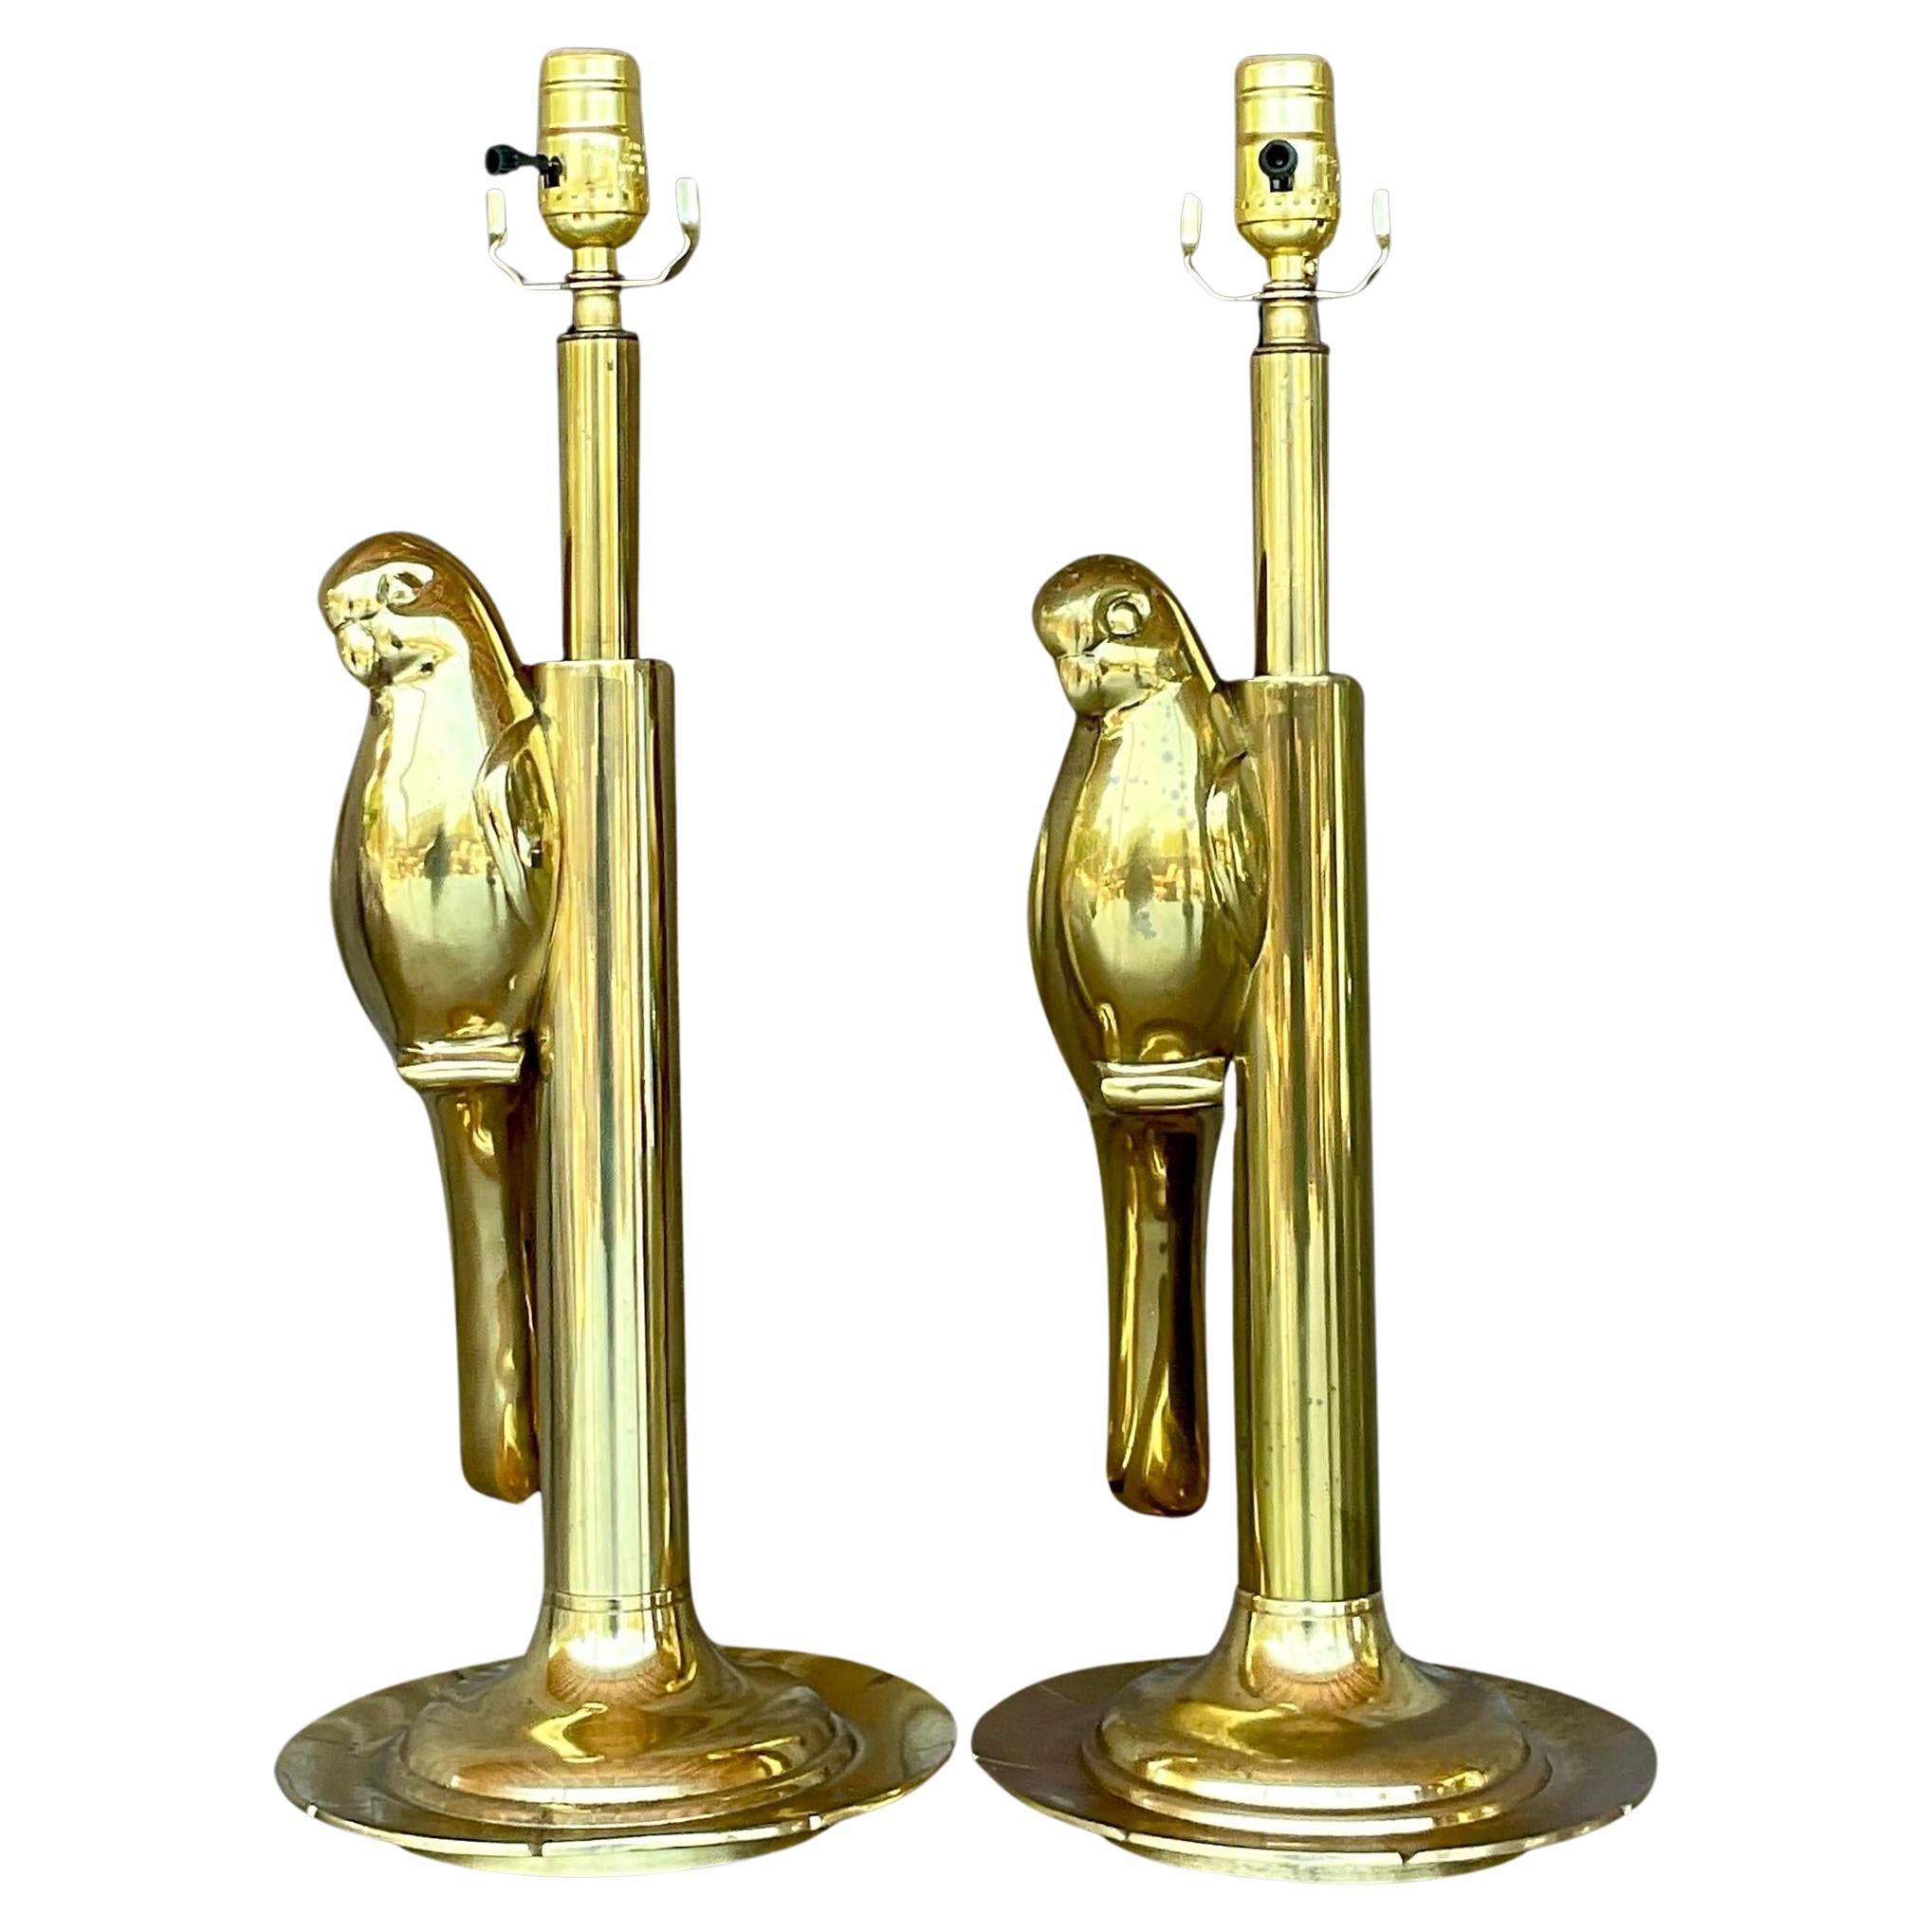 Vintage Boho Polished Brass Parrot Lamps - a Pair